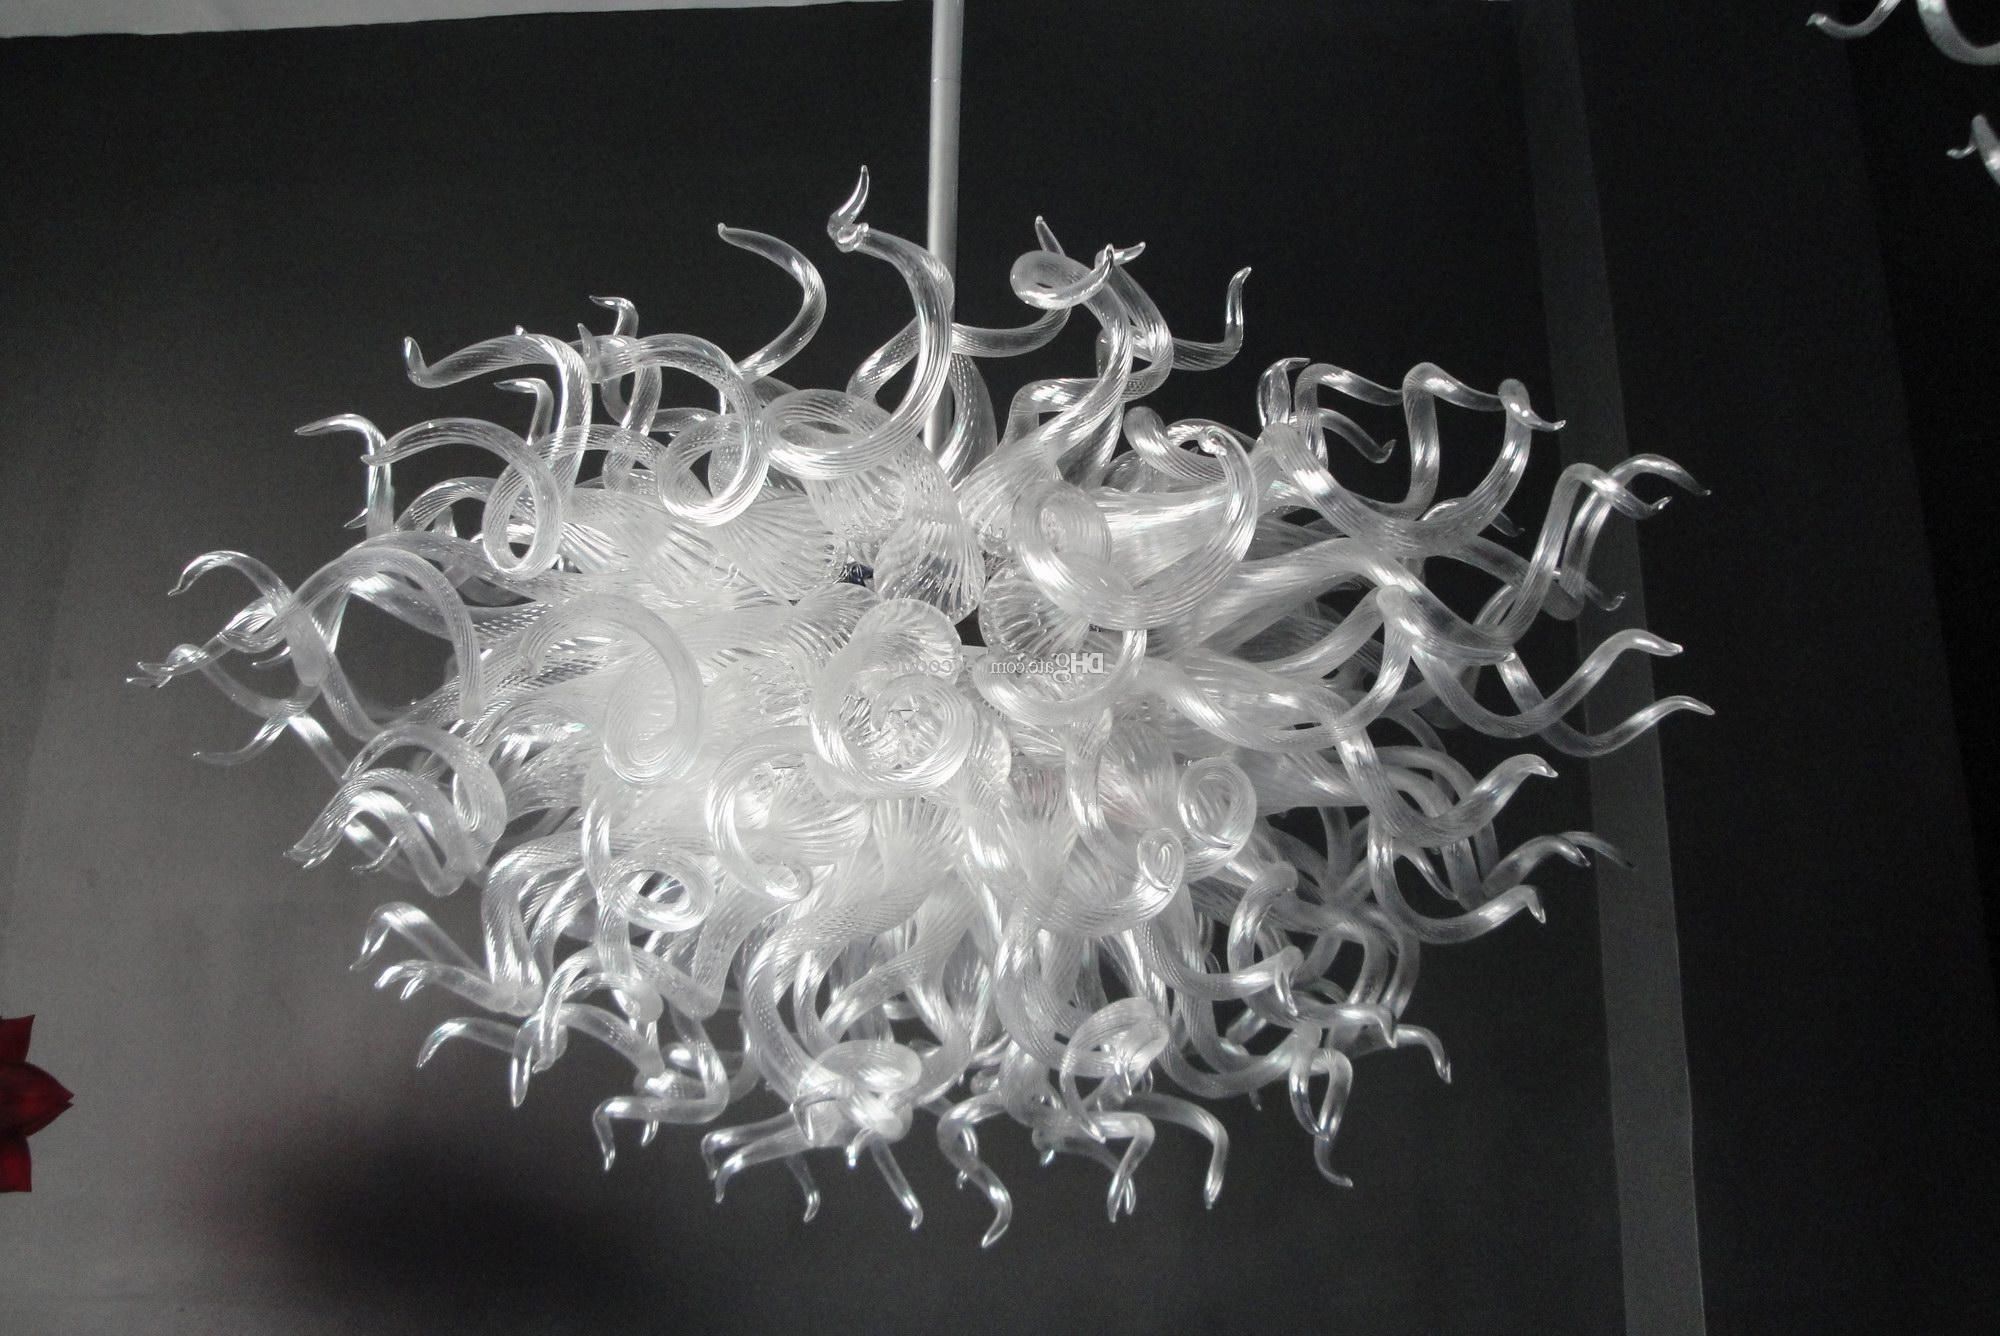 [%2018 100% Hand Blown Artistic Chandelier Lamp Dale Chihuly Murano For Recent White Contemporary Chandelier|white Contemporary Chandelier Regarding Favorite 2018 100% Hand Blown Artistic Chandelier Lamp Dale Chihuly Murano|latest White Contemporary Chandelier In 2018 100% Hand Blown Artistic Chandelier Lamp Dale Chihuly Murano|best And Newest 2018 100% Hand Blown Artistic Chandelier Lamp Dale Chihuly Murano With Regard To White Contemporary Chandelier%] (Photo 2 of 15)